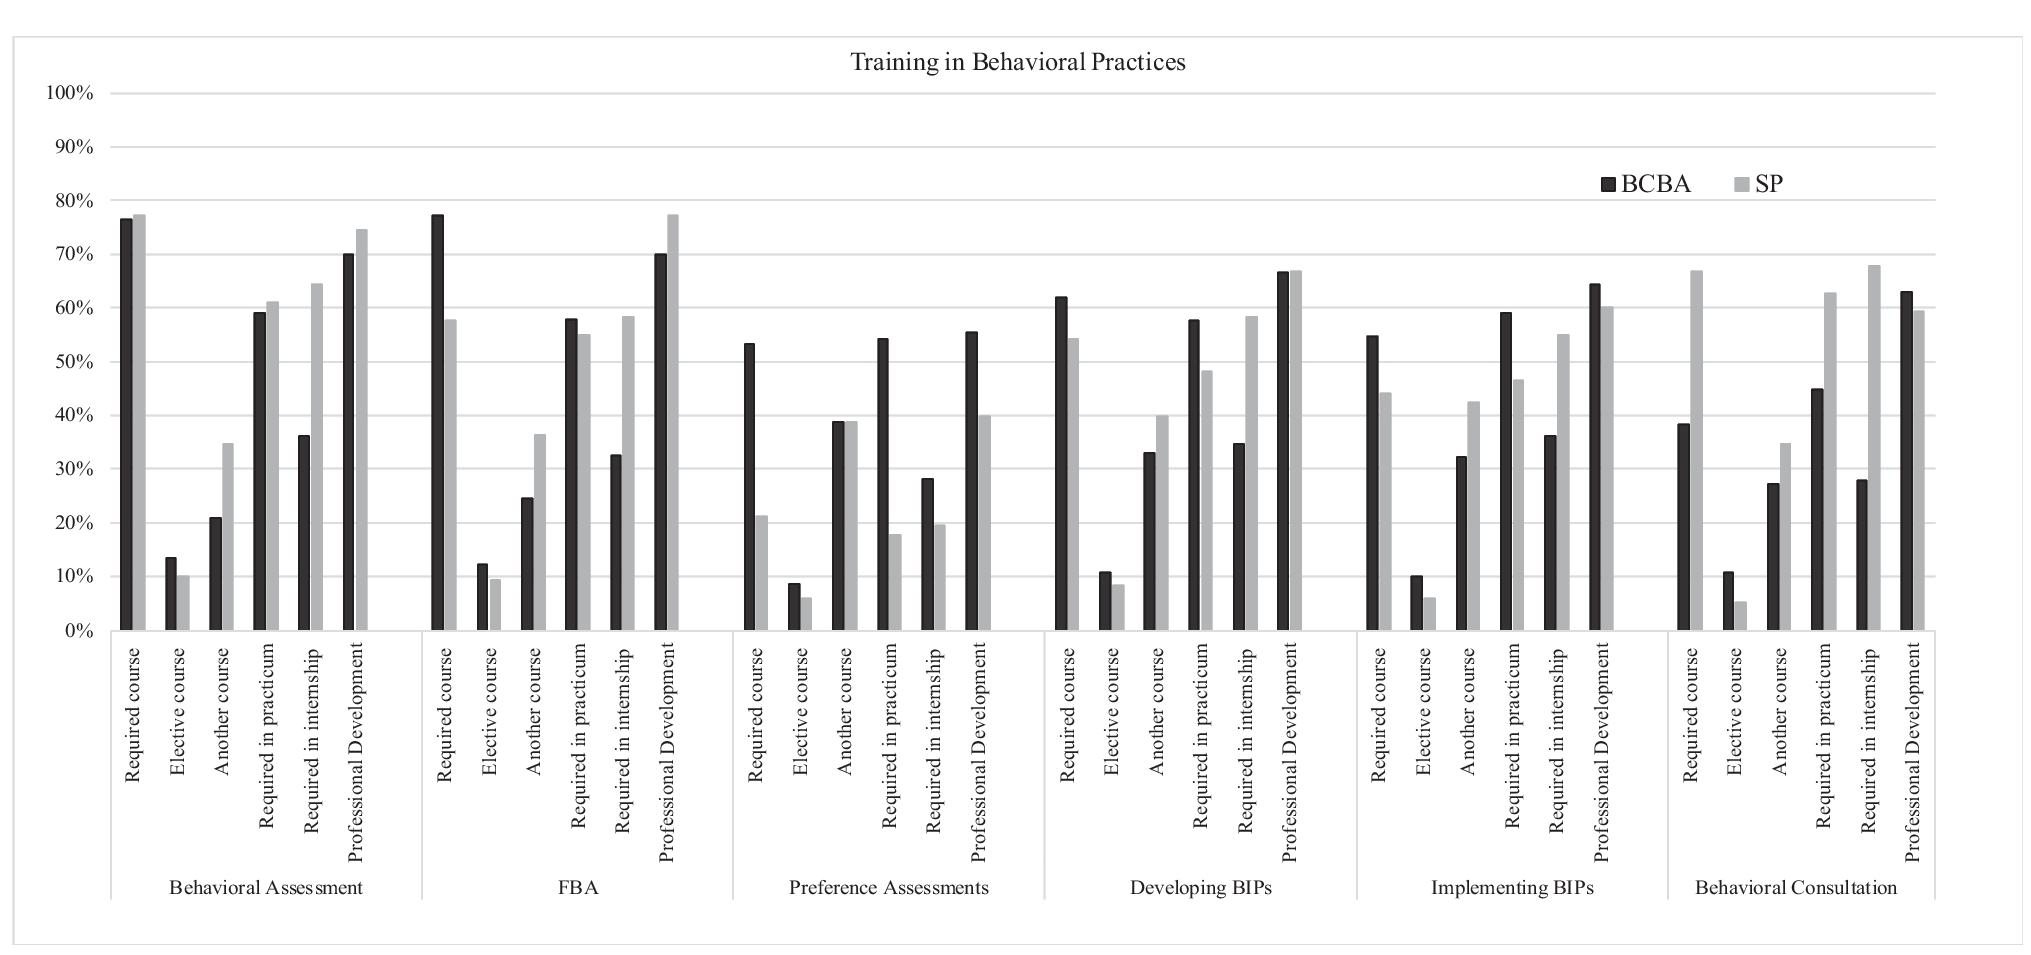 Overlapping Training and Roles: An Exploration of the State of Interprofessional Practice between Behavior Analysts and School Psychologists